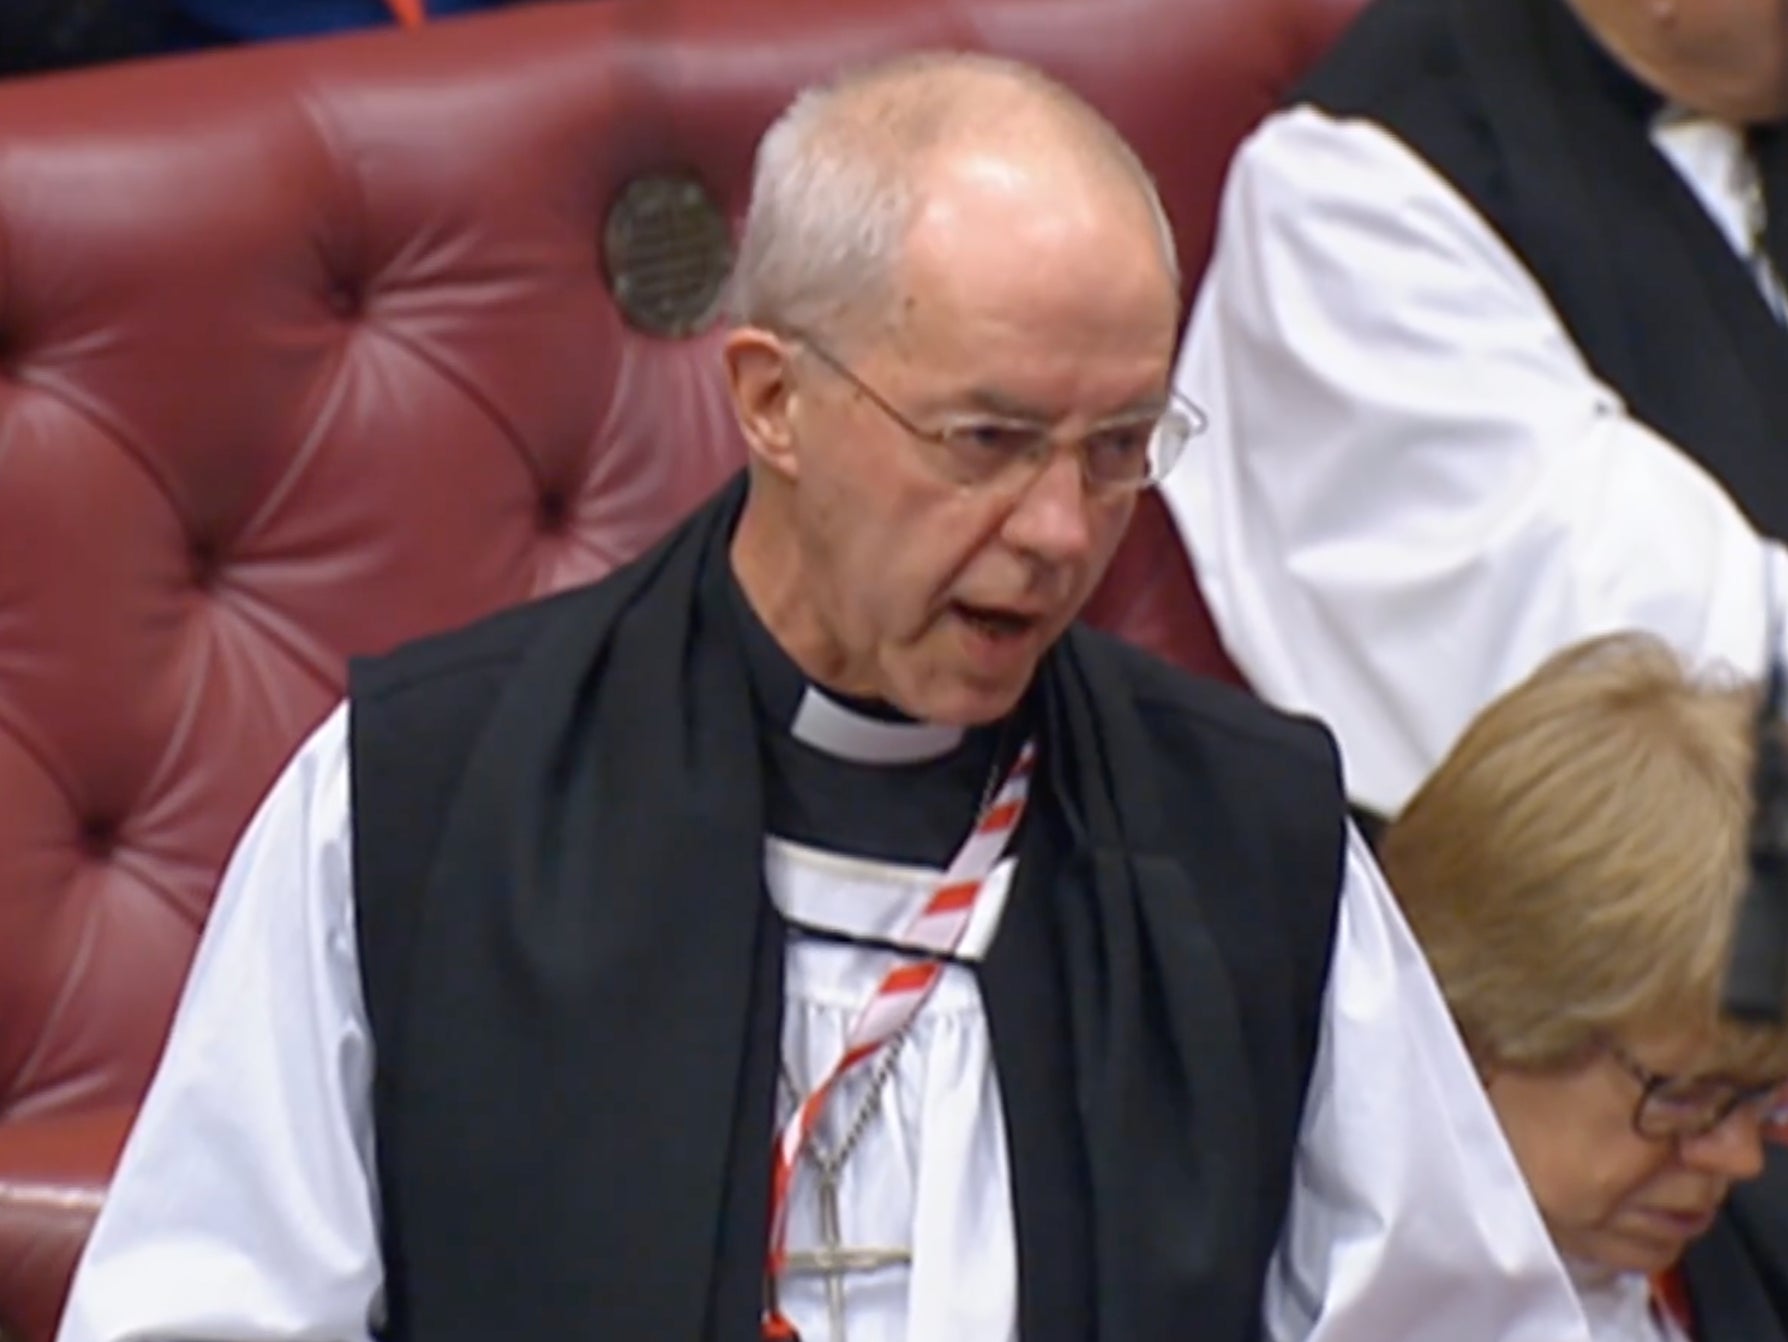 The Archbishop of Canterbury speaking in the Lords